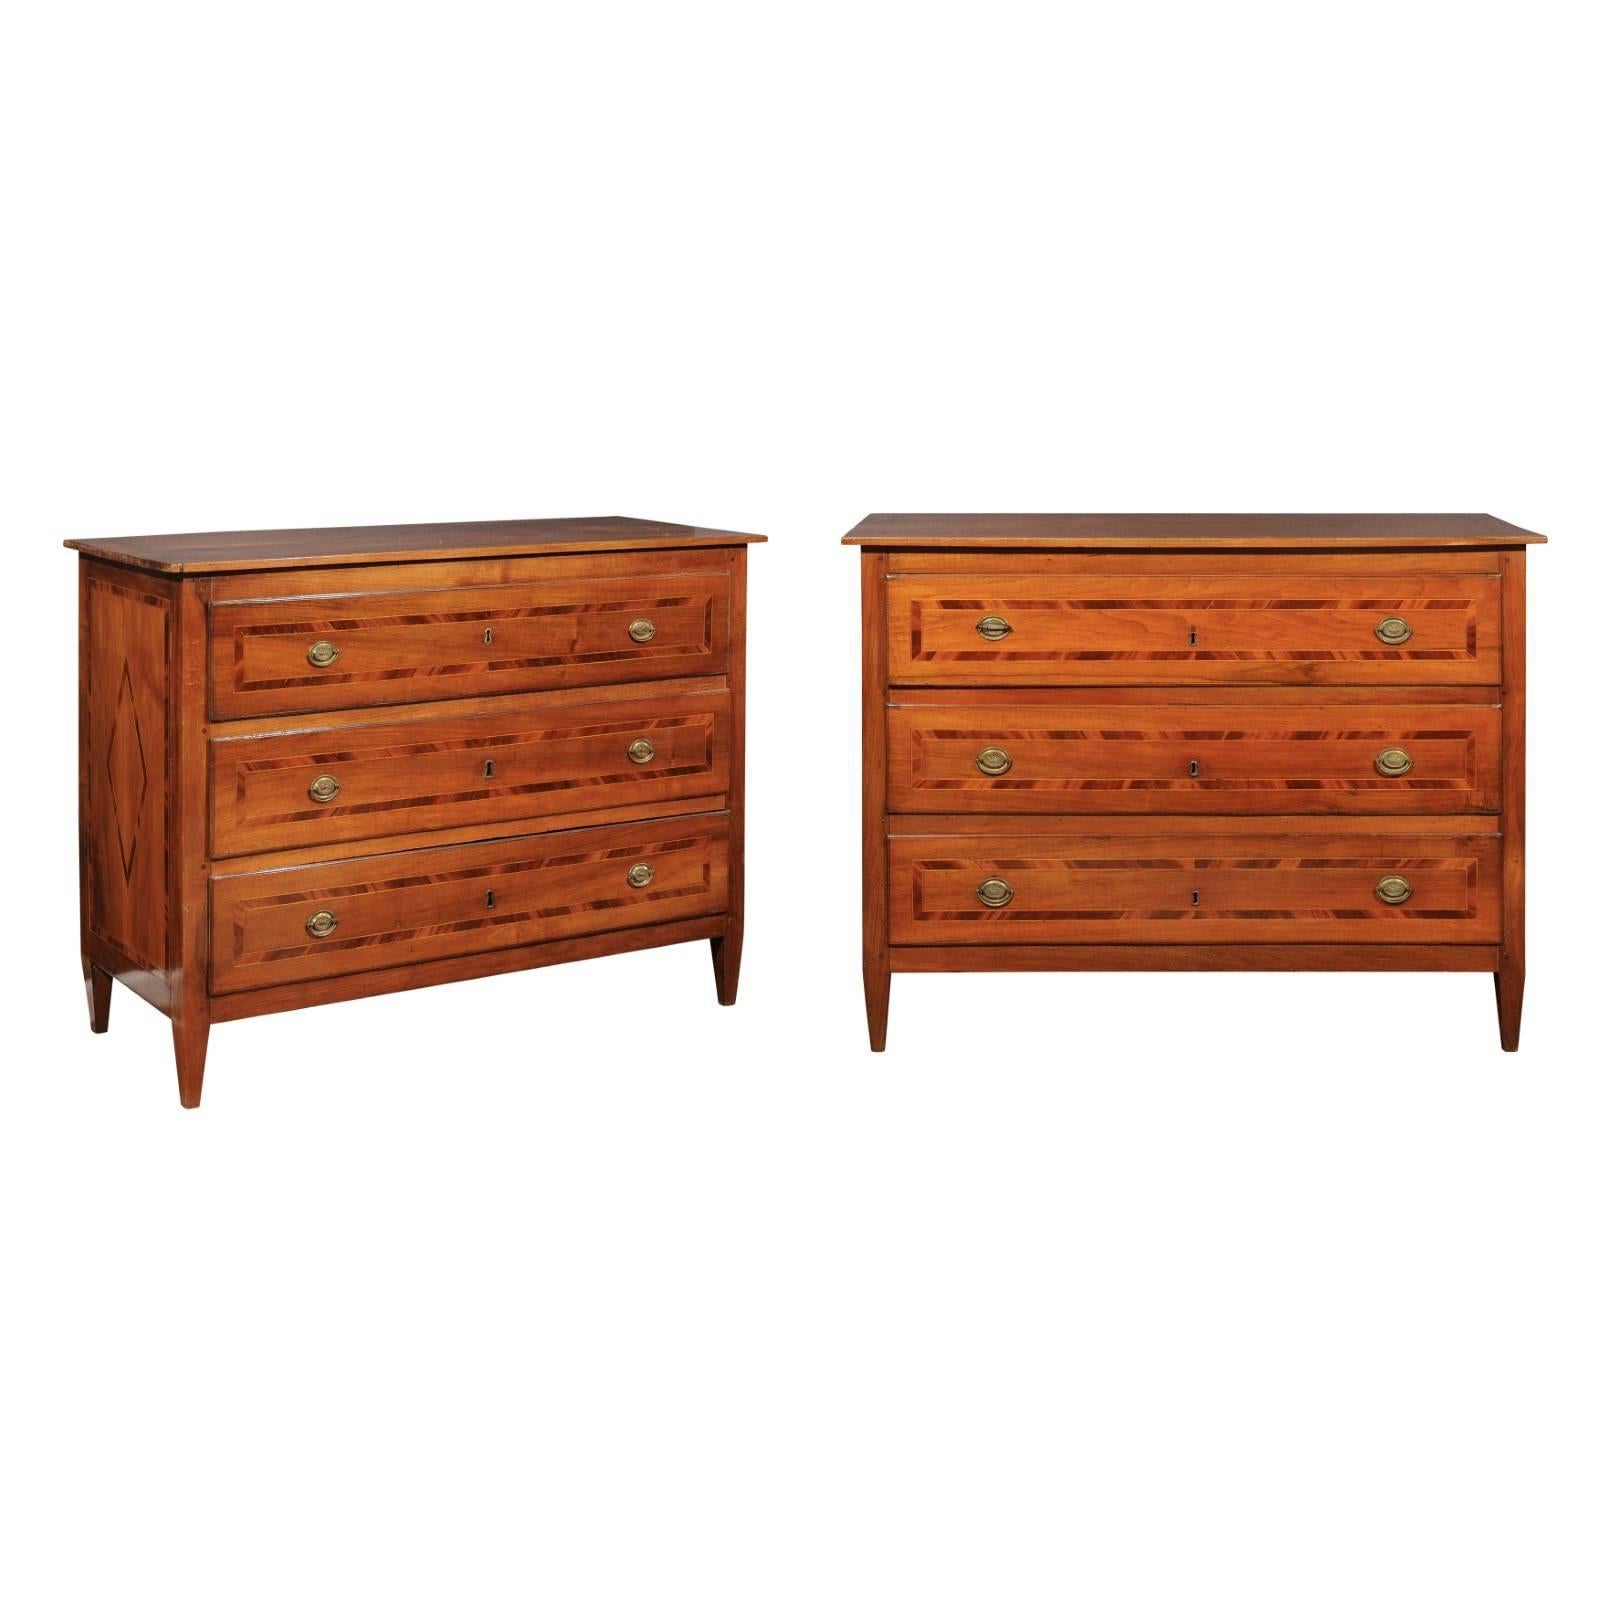 Pair of Neoclassical 1790s Italian Walnut Commodes with Diamond Inlaid Décor